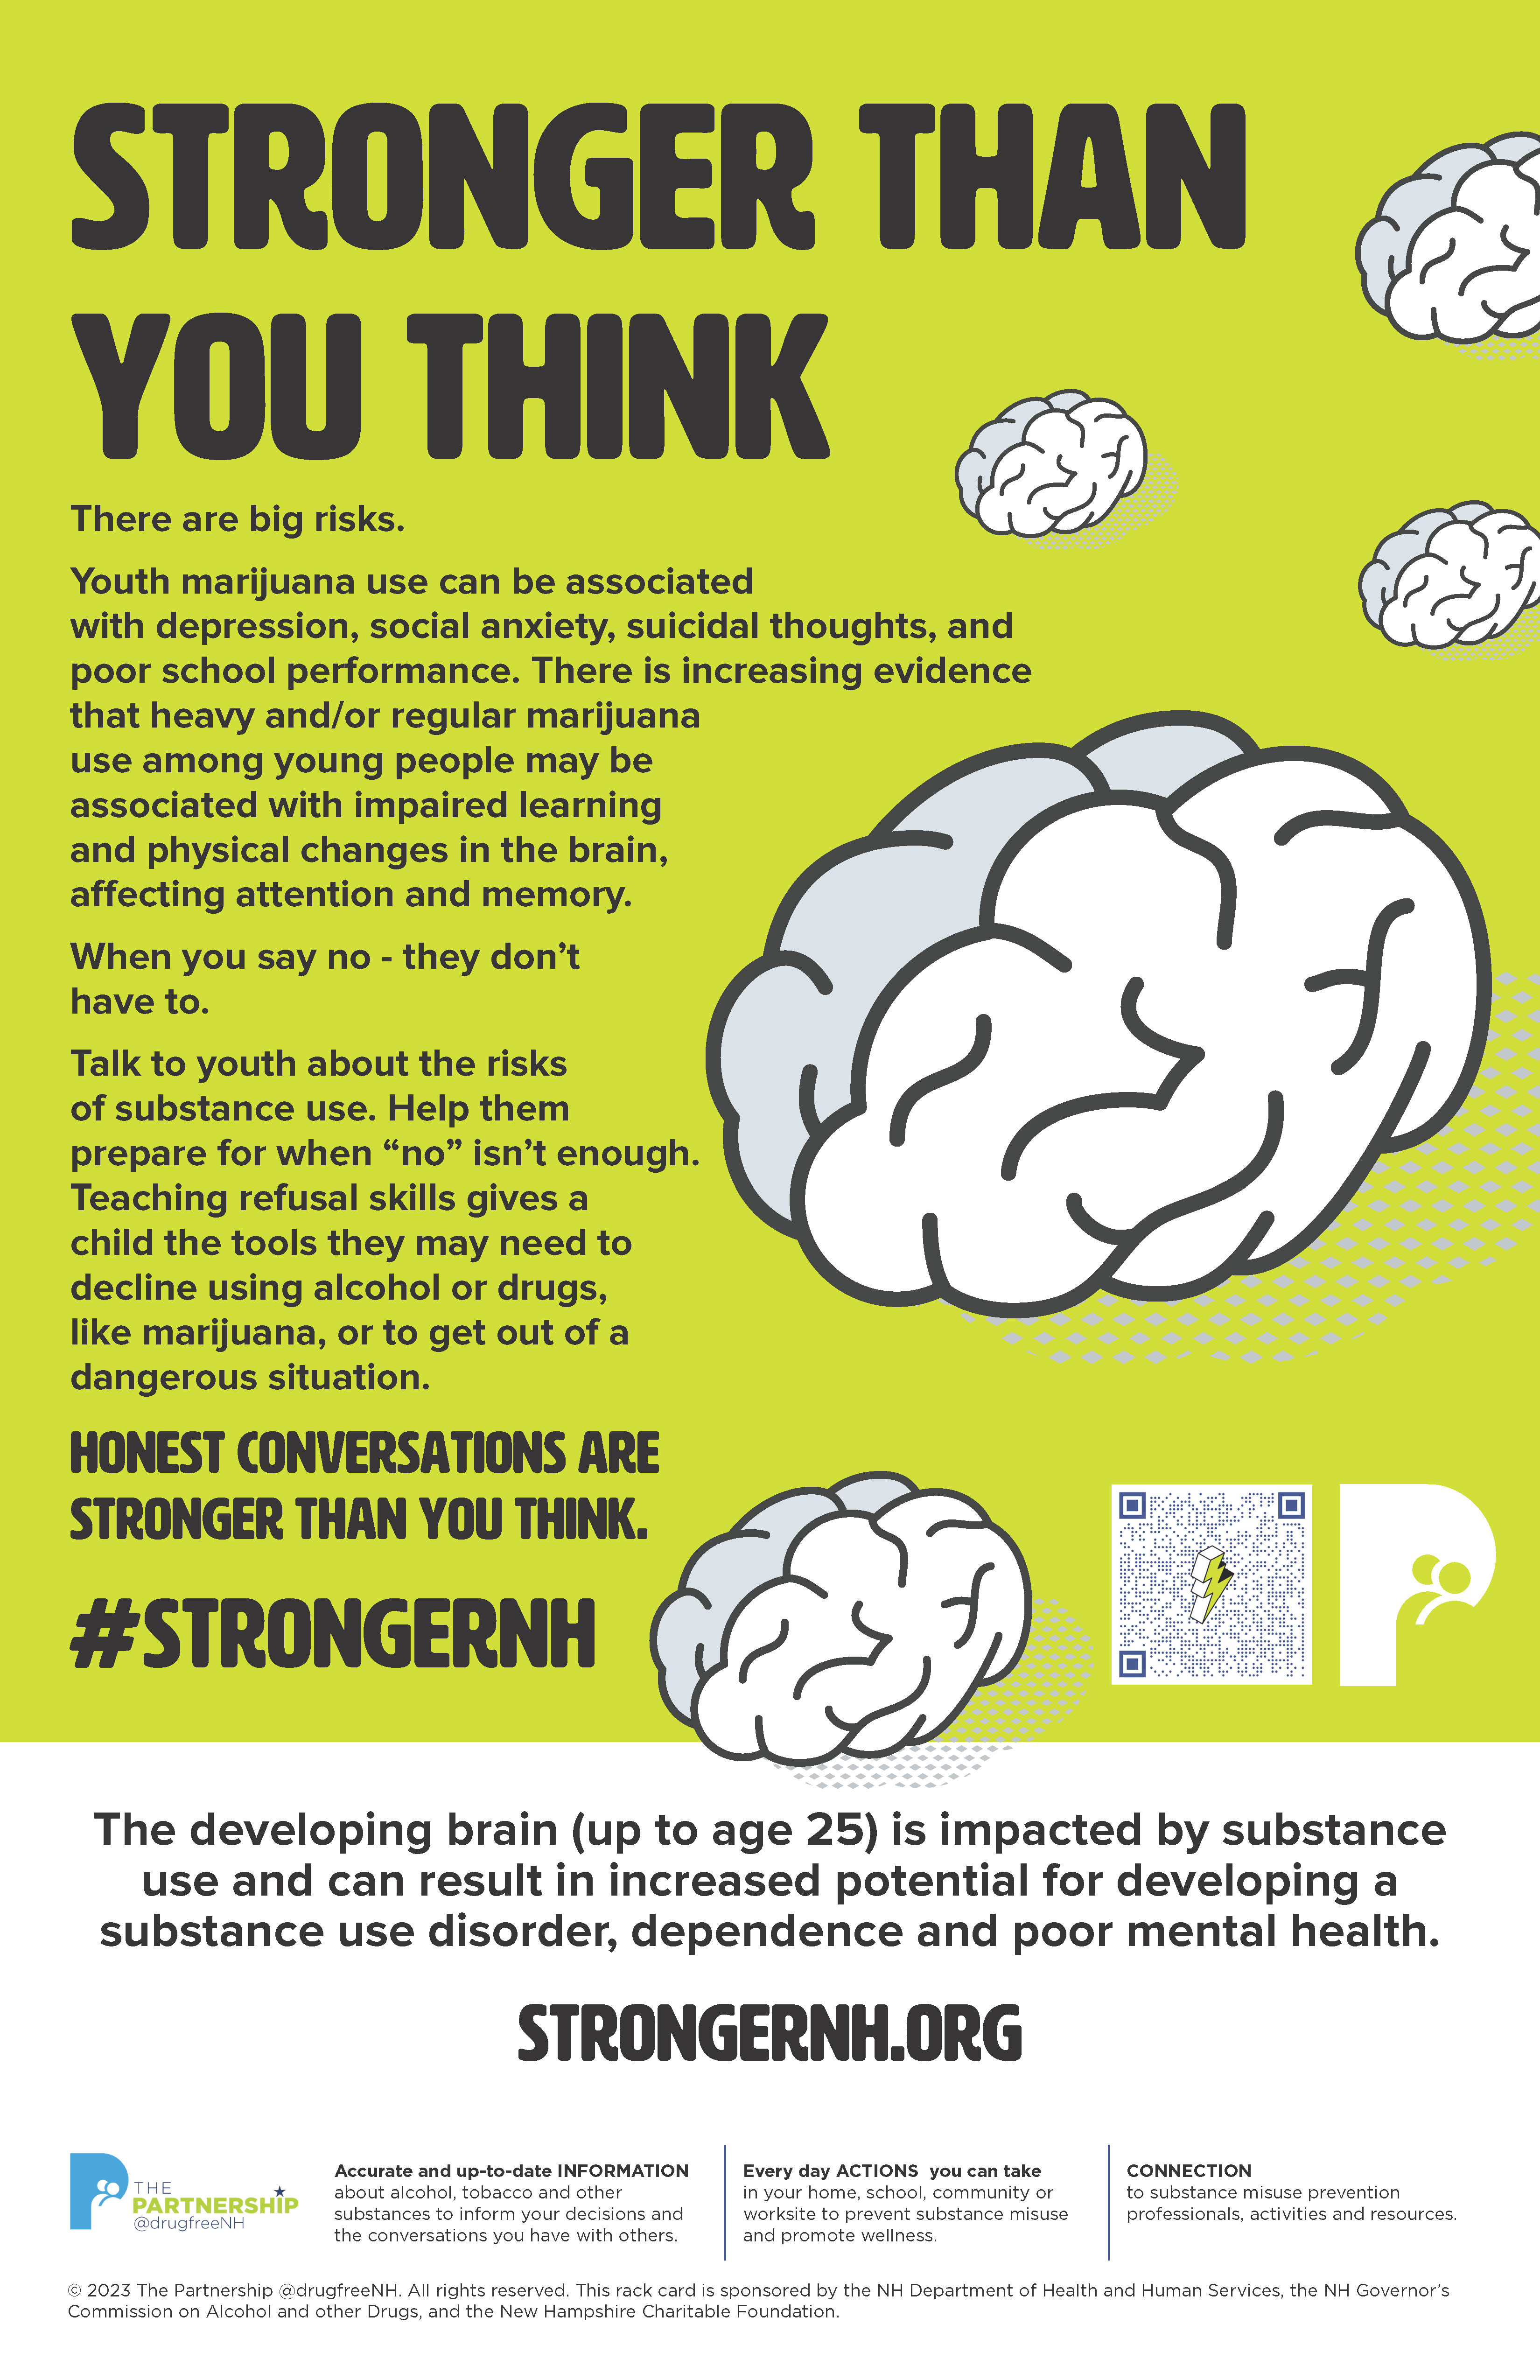 Honest conversations are stronger than you think. - Stronger Than You Think - campaign poster